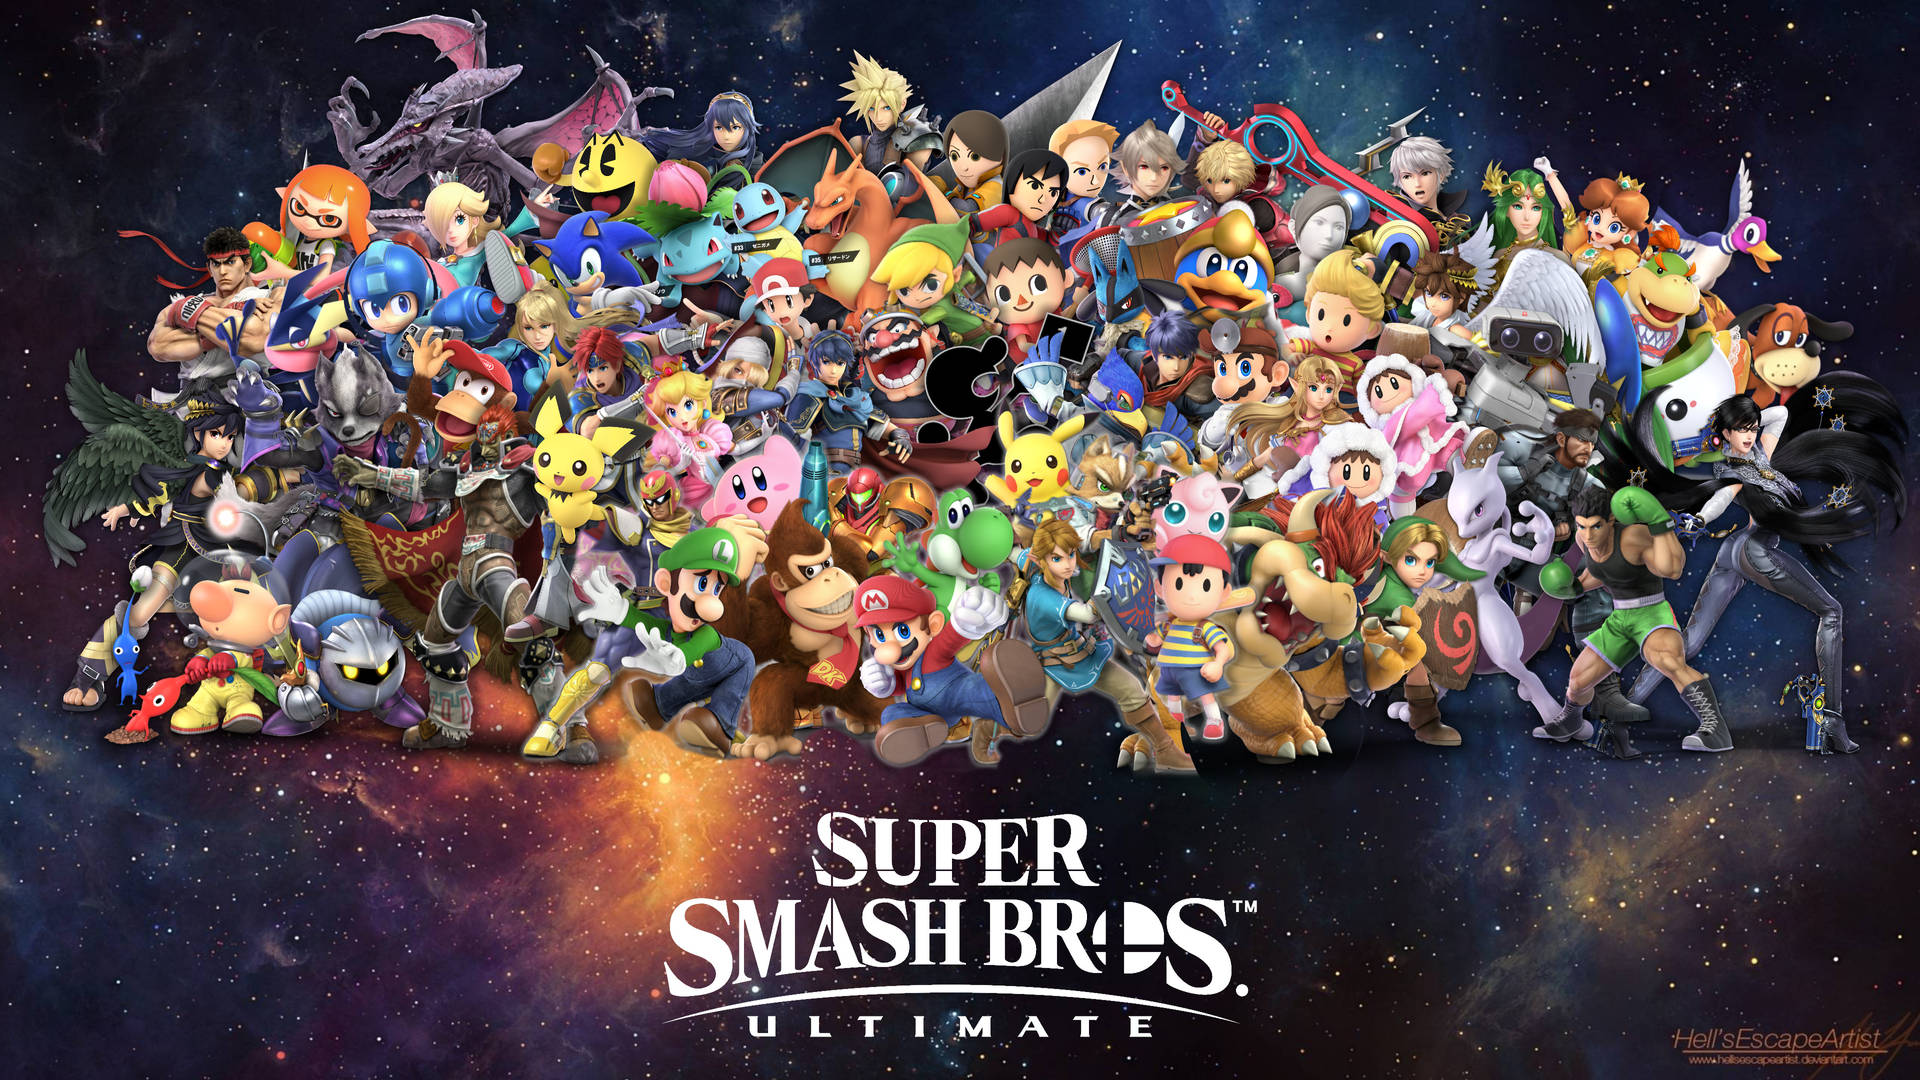 Play the ultimate Super Smash Bros game! Wallpaper